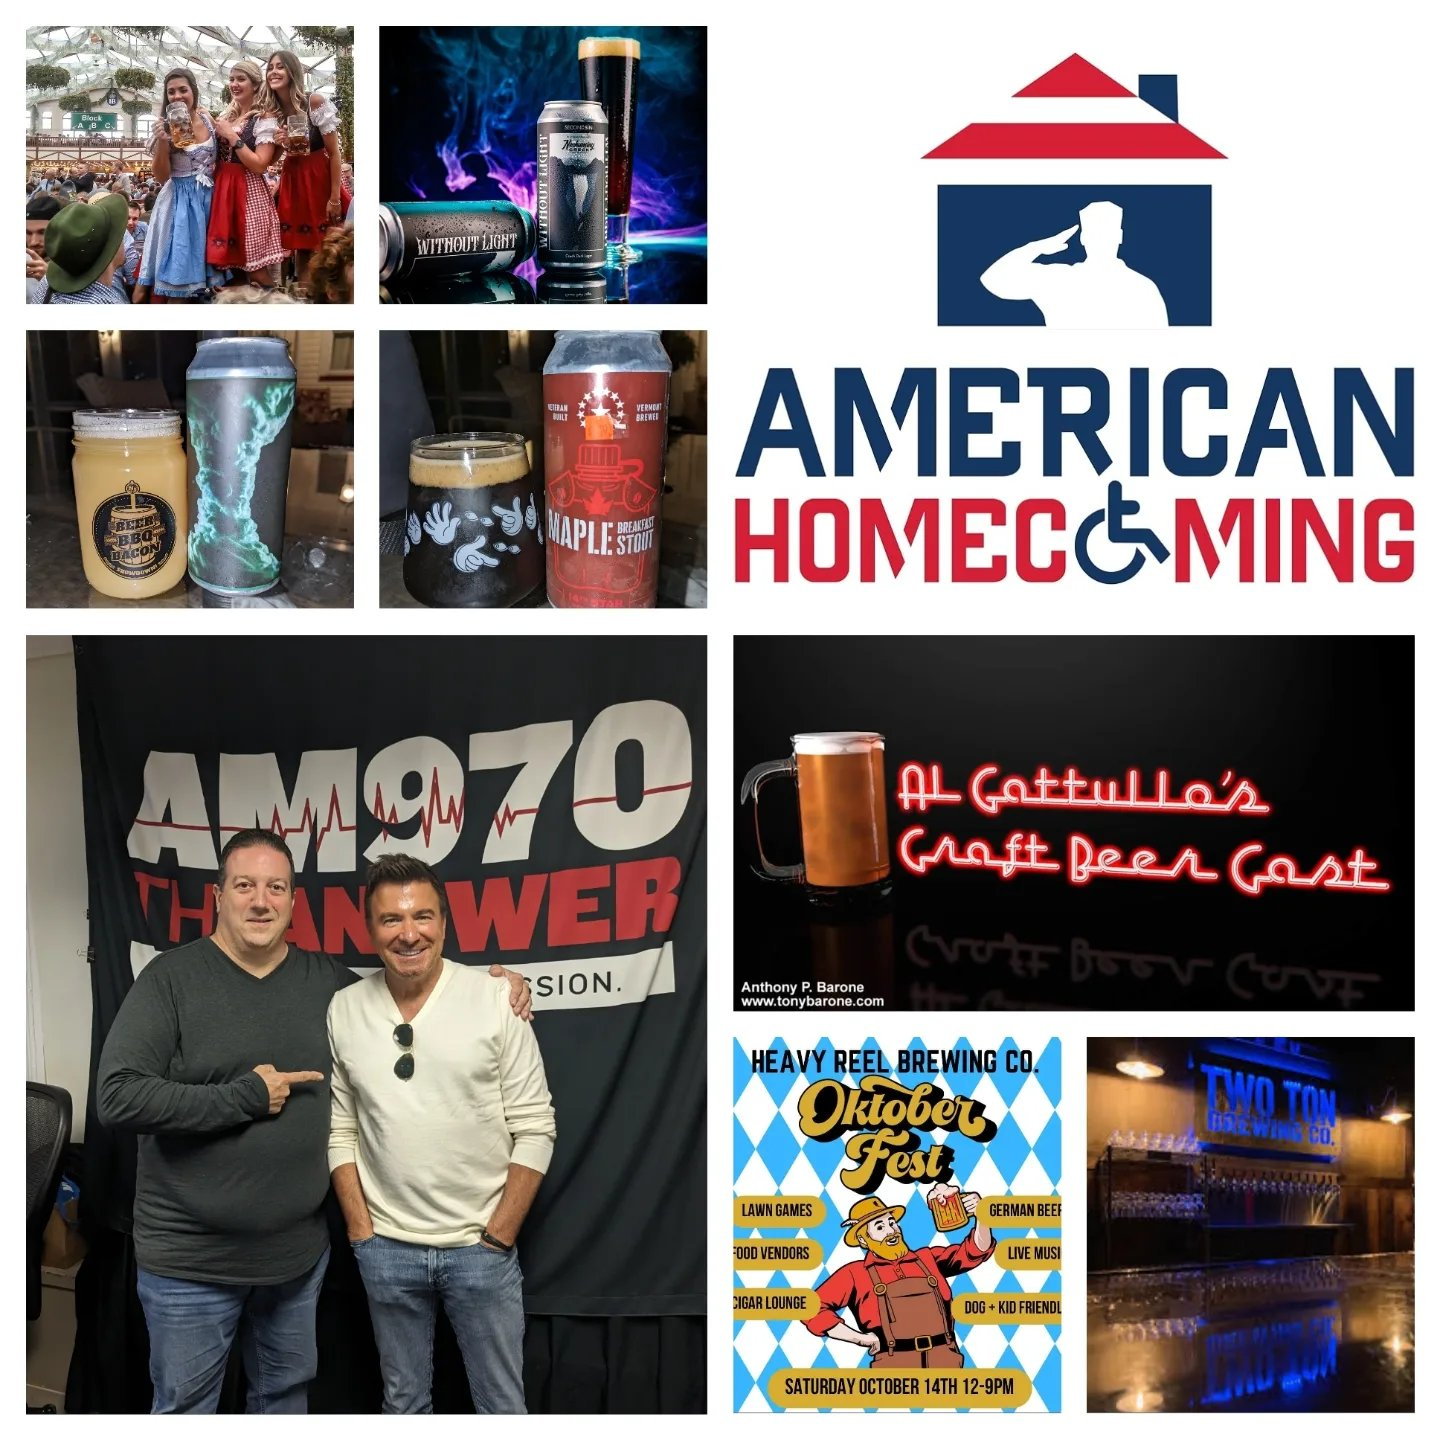 AG Craft Beer Cast 10-8-23 Jack Maxwell